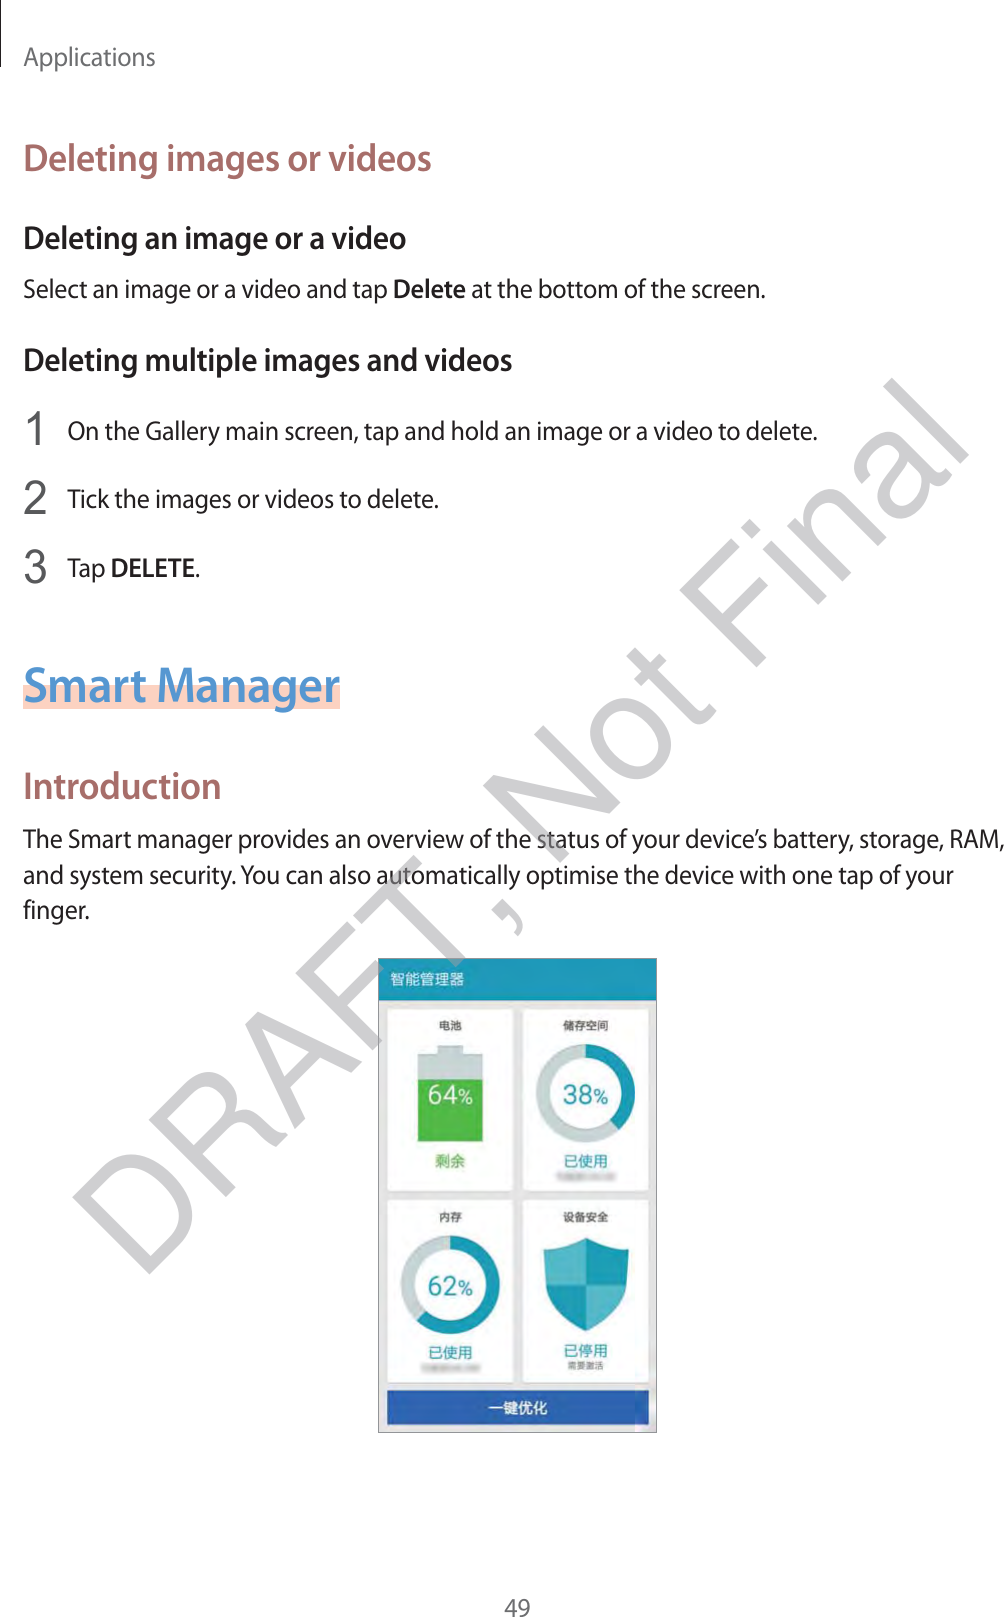 Applications49Deleting images or videosDeleting an image or a videoSelect an image or a video and tap Delete at the bottom of the screen.Deleting multiple images and videos1 On the Gallery main screen, tap and hold an image or a video to delete.2 Tick the images or videos to delete.3 Tap DELETE.Smart ManagerIntroductionThe Smart manager provides an overview of the status of your device’s battery, storage, RAM, and system security. You can also automatically optimise the device with one tap of your finger.DRAFT, Not Final